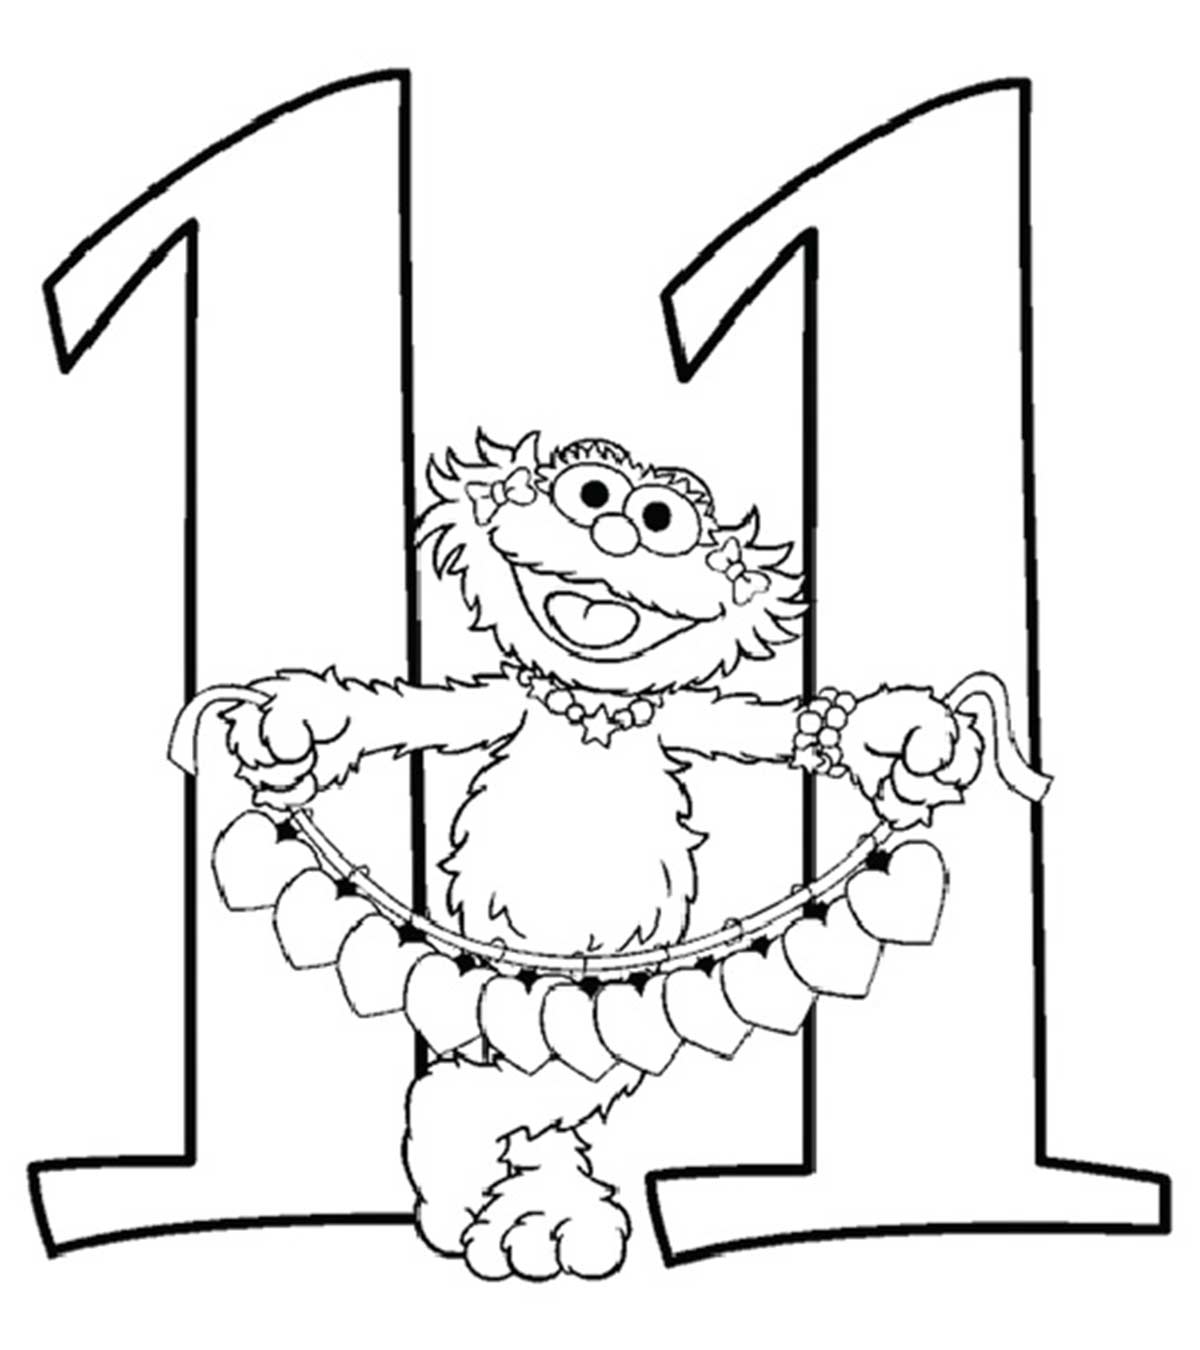 21 Easy To Learn Number Coloring Pages For Your Little Ones